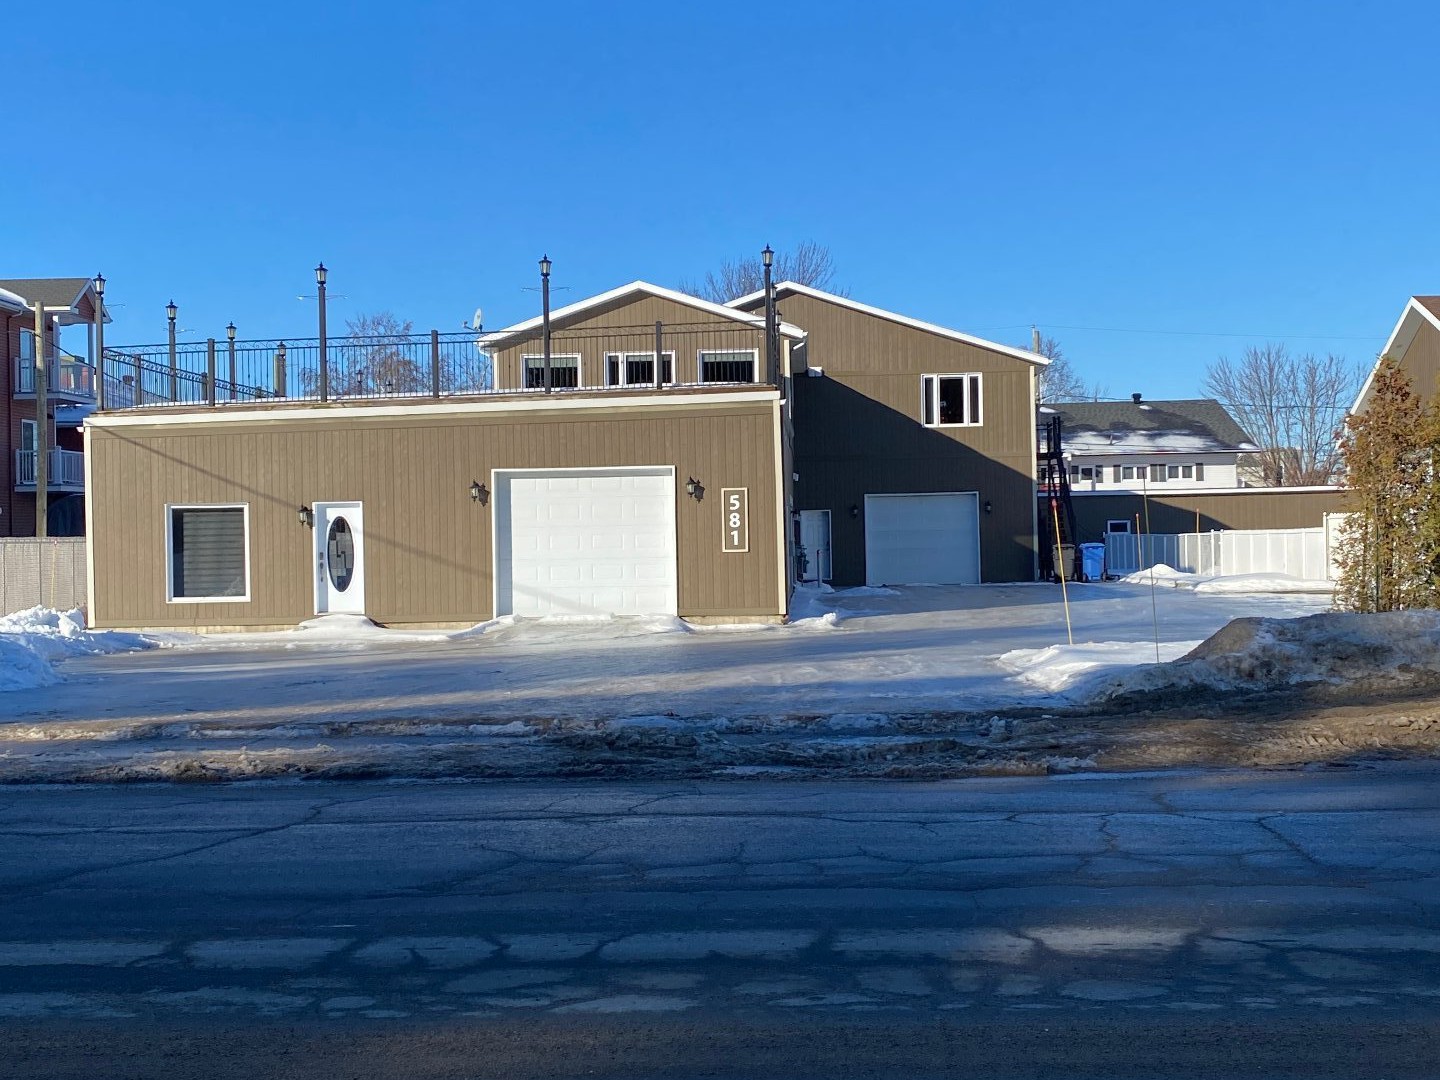 Two or more storey for sale, Shawinigan